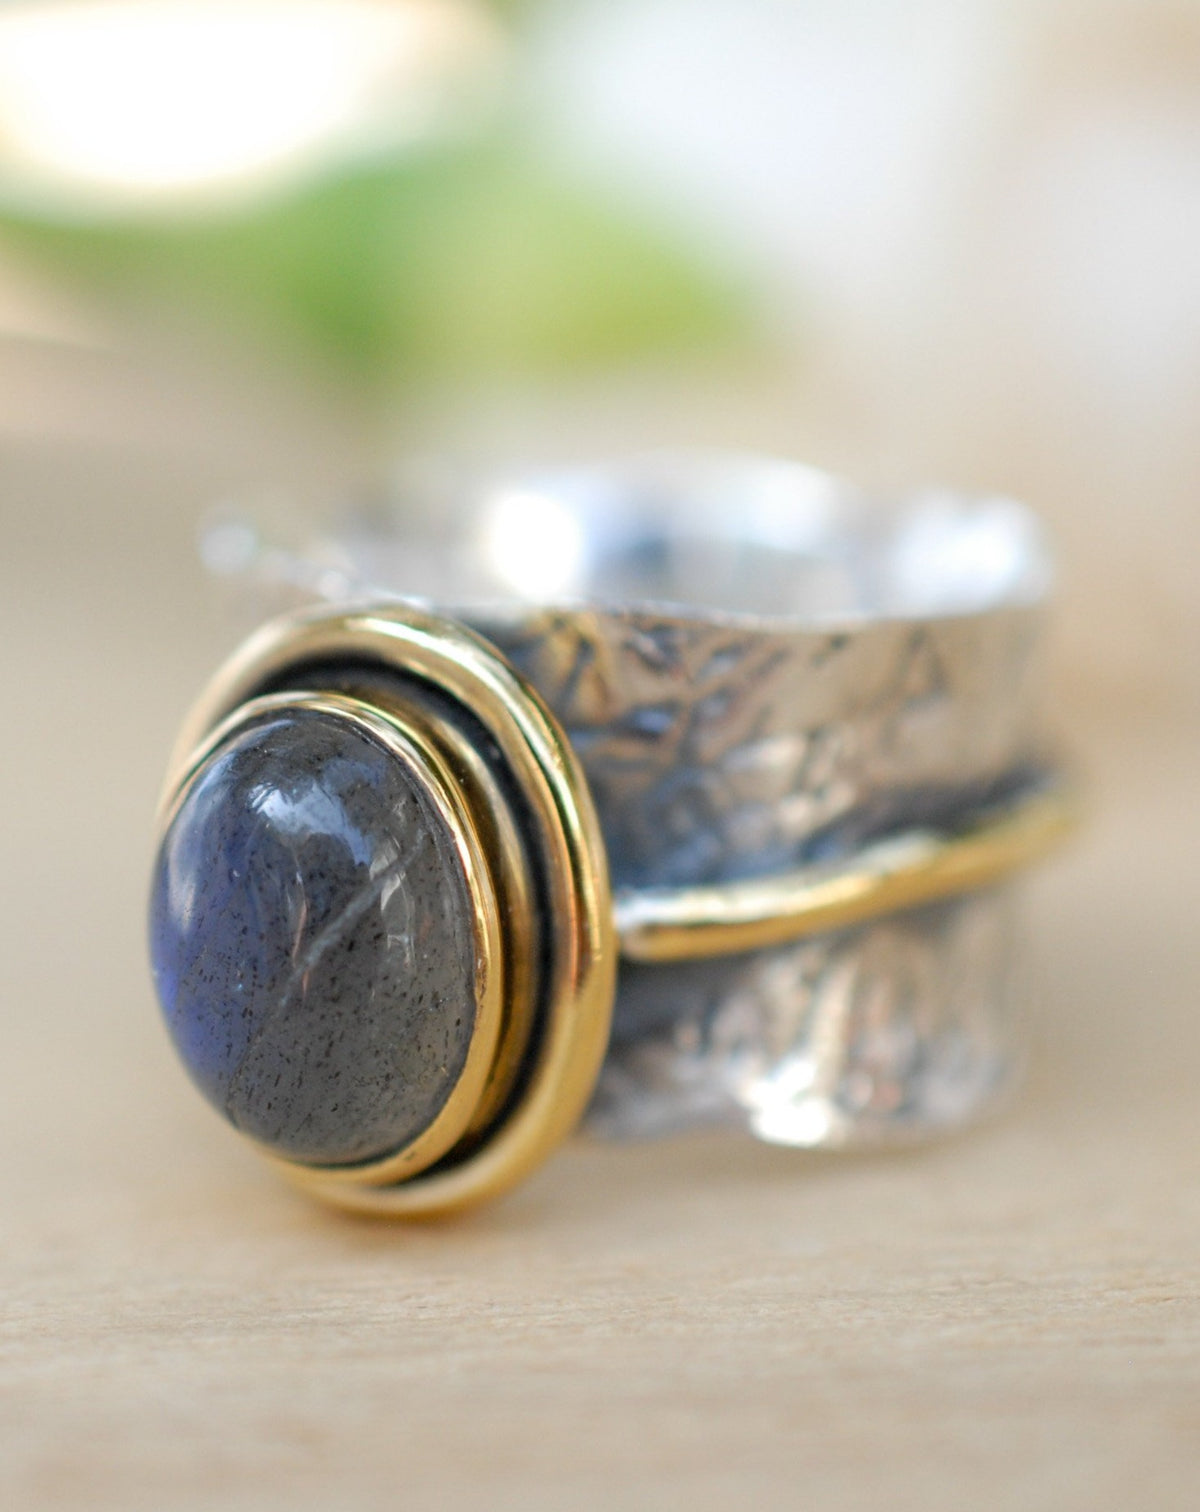 Labradorite ring * Sterling silver ring * Gold Vermeil ring * Wide ring * Handmade ring * Wave band ring *Gift for her * gemstone * BJR208